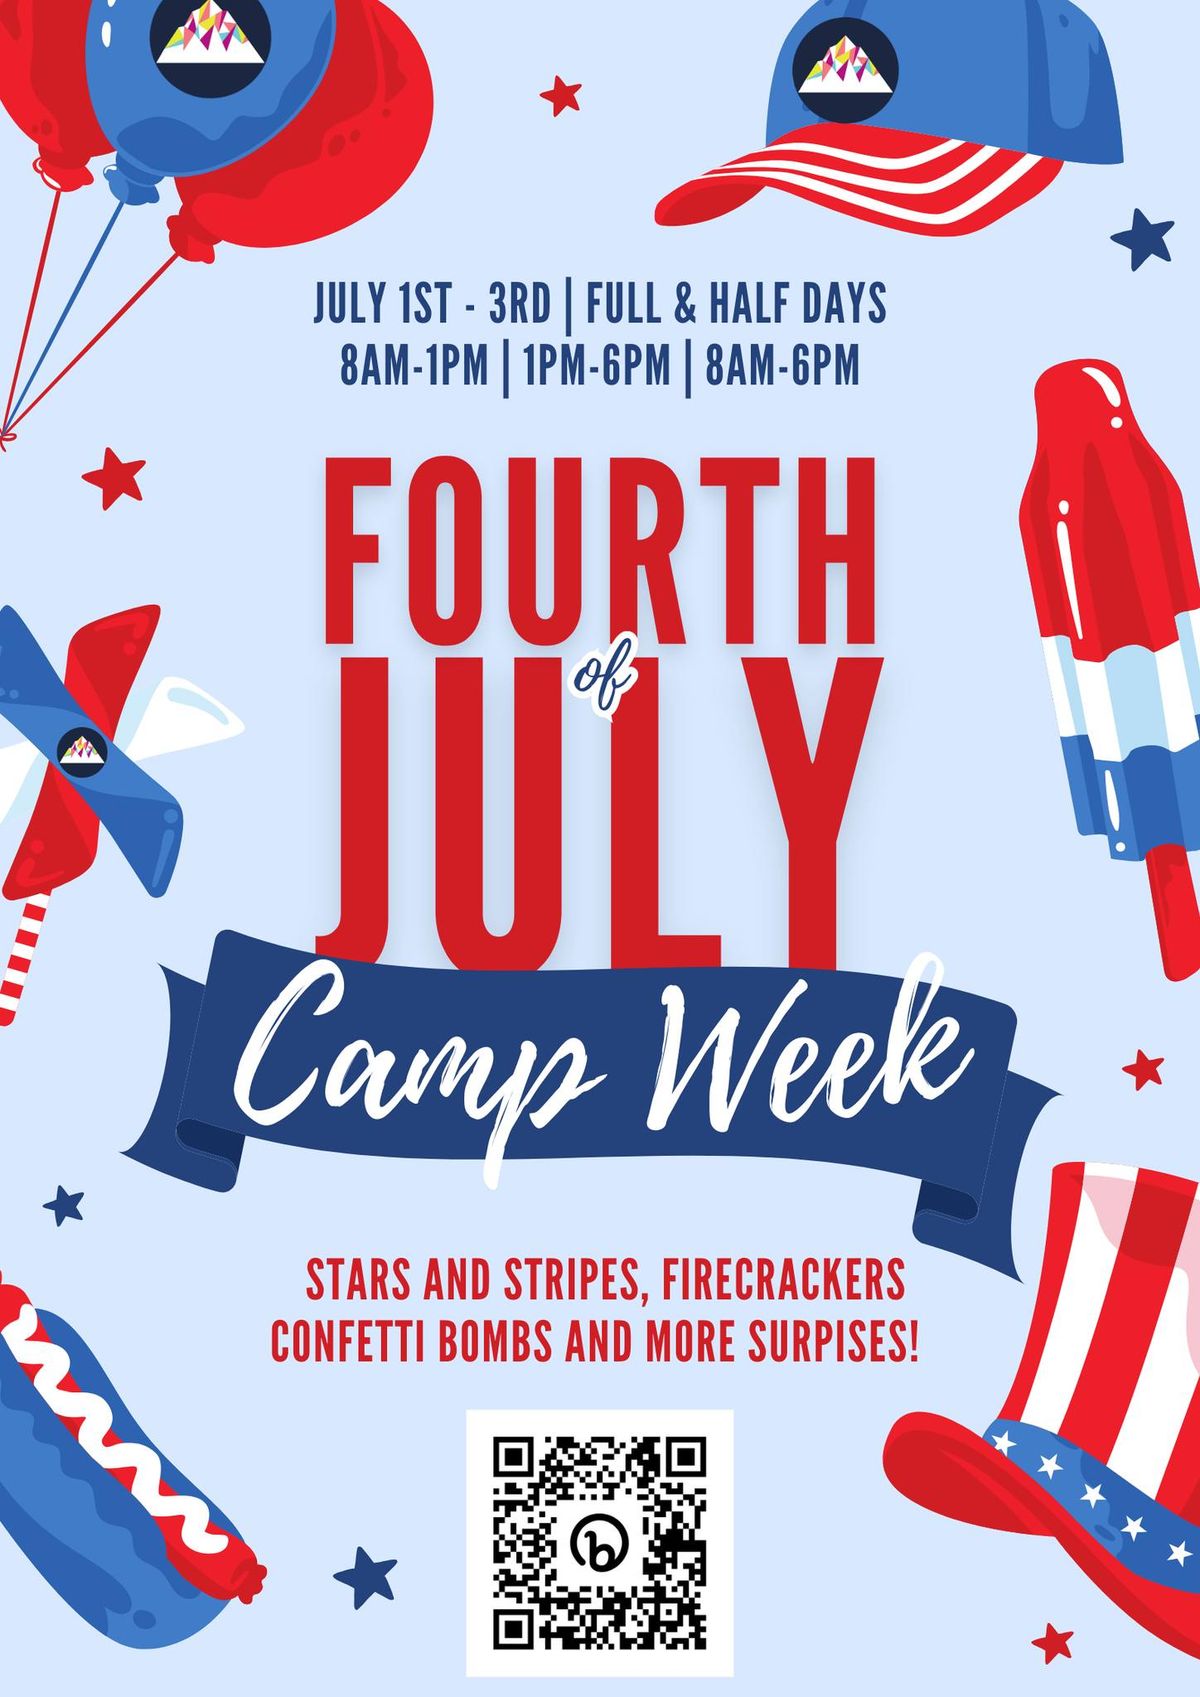 4th of July Summer Camp Week